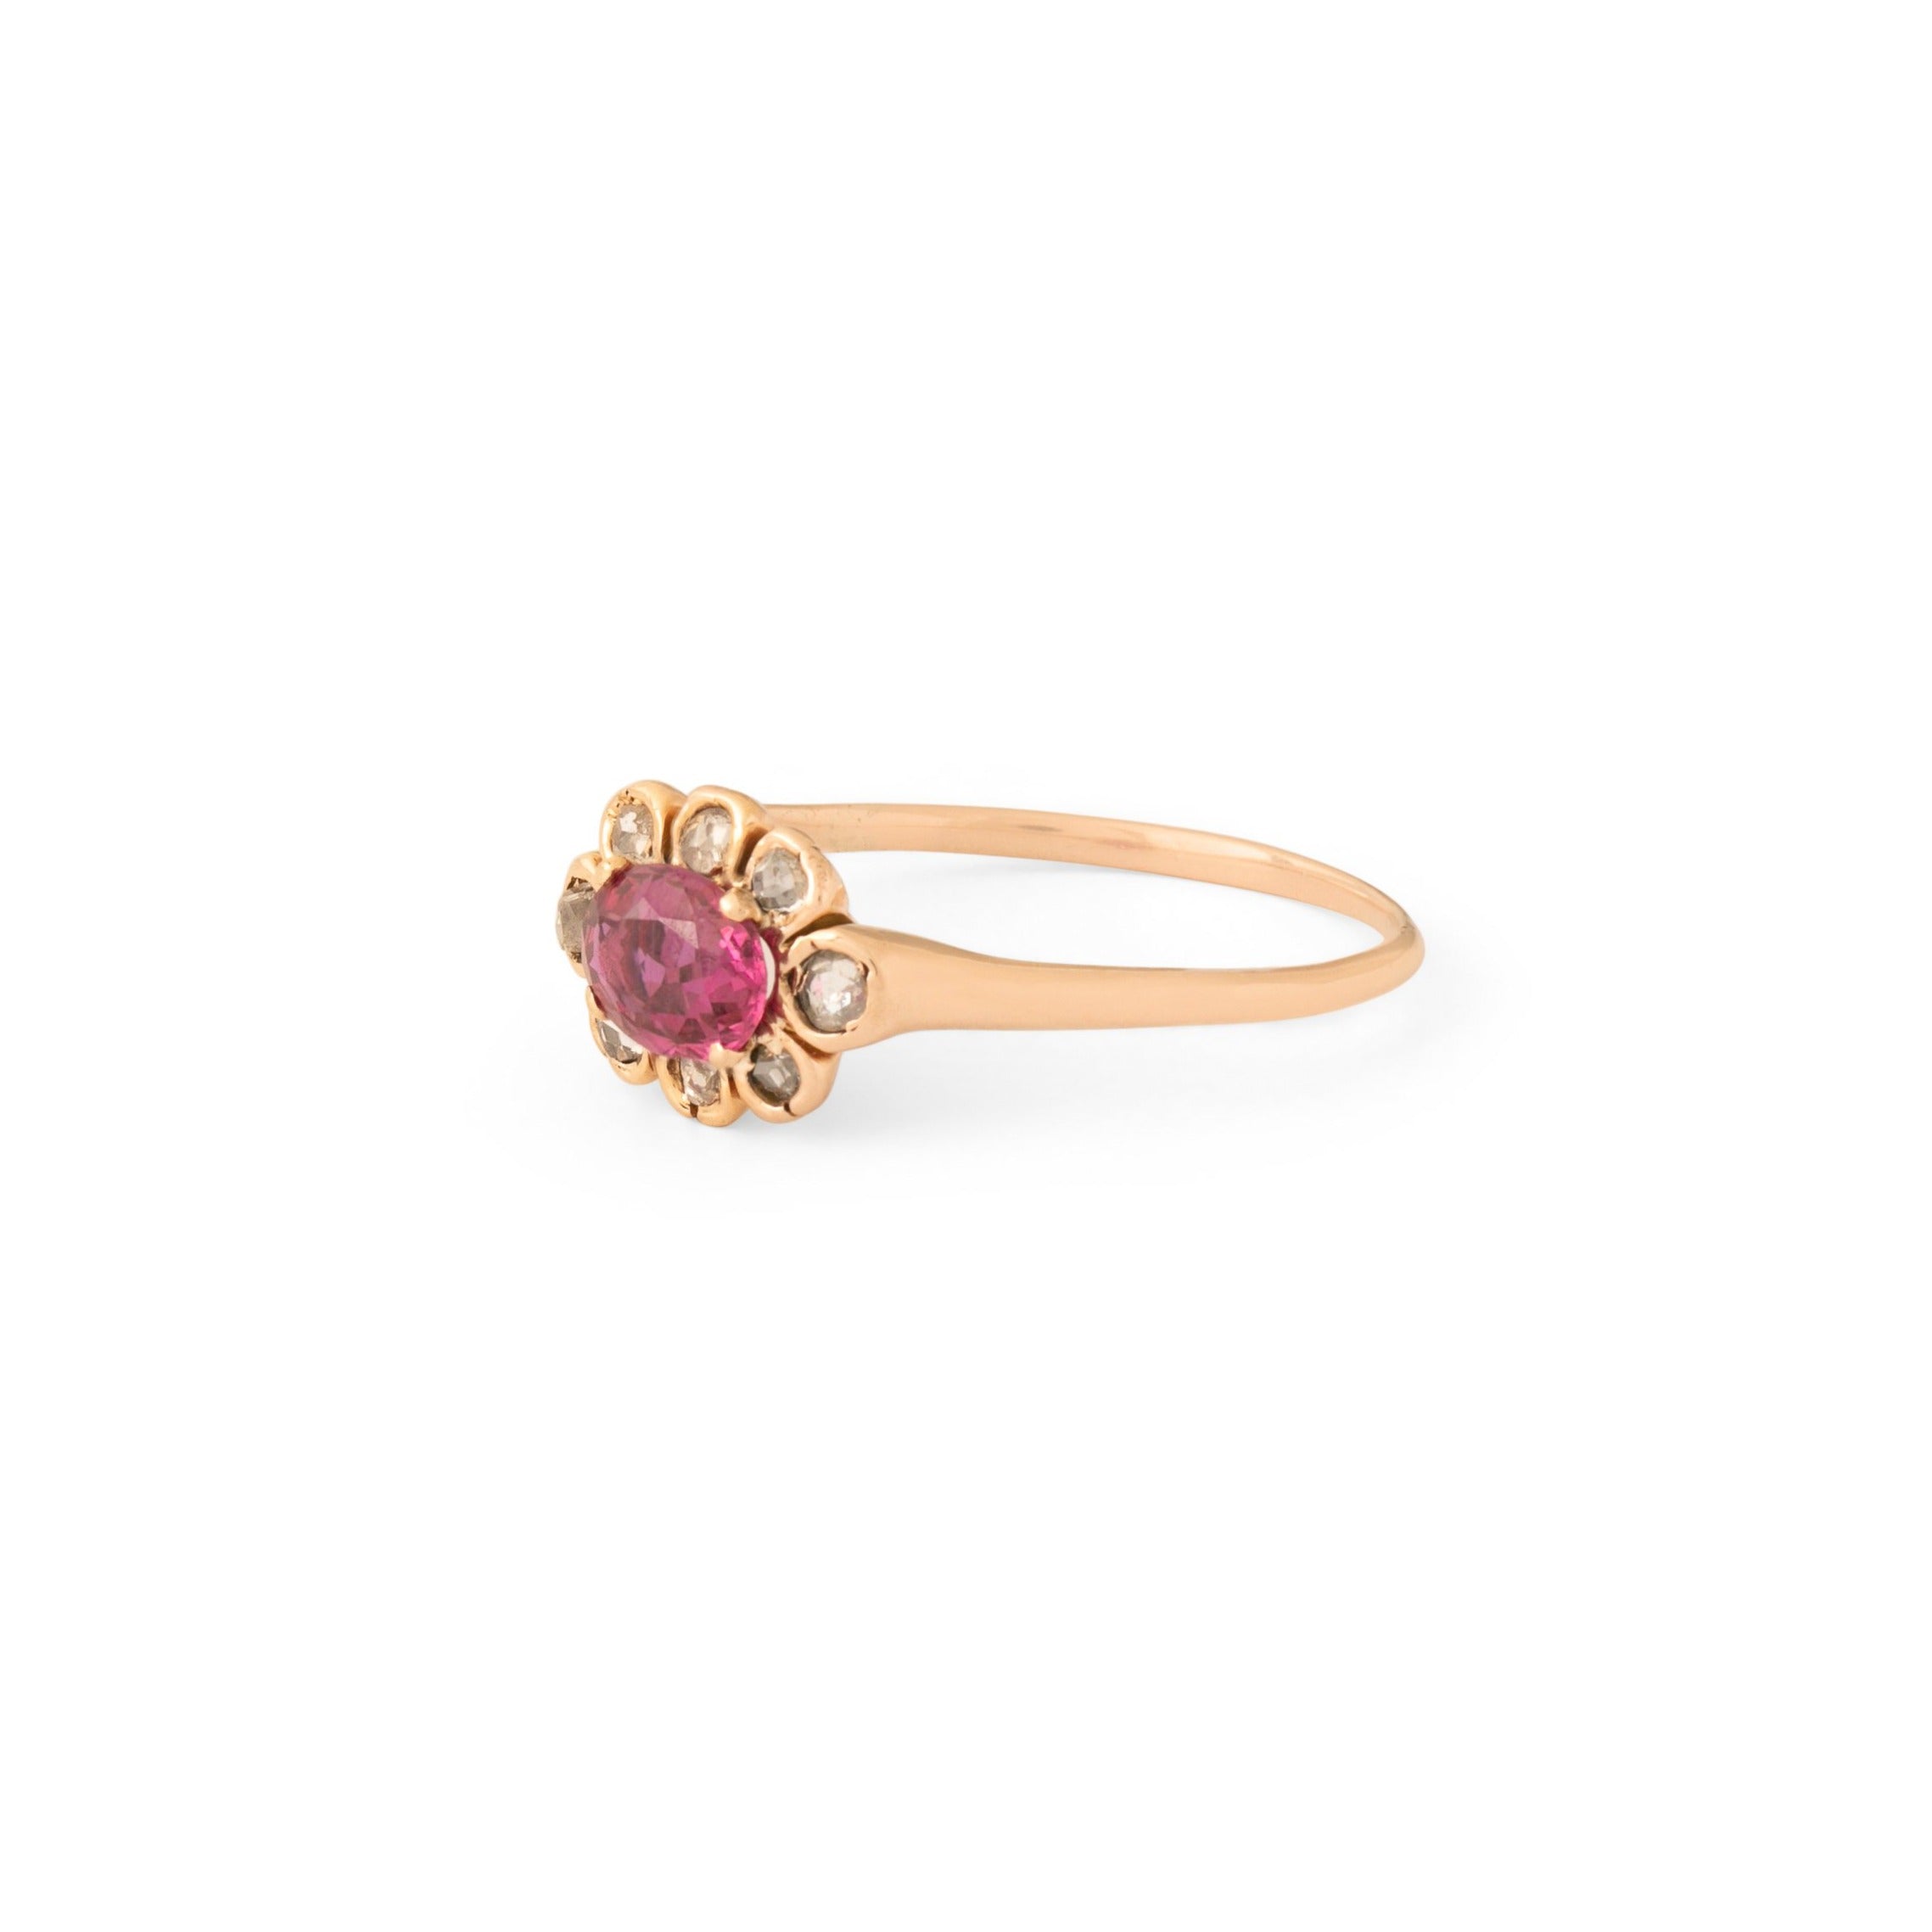 Ruby, Rose Cut Diamond, and 10K Gold Cluster Ring